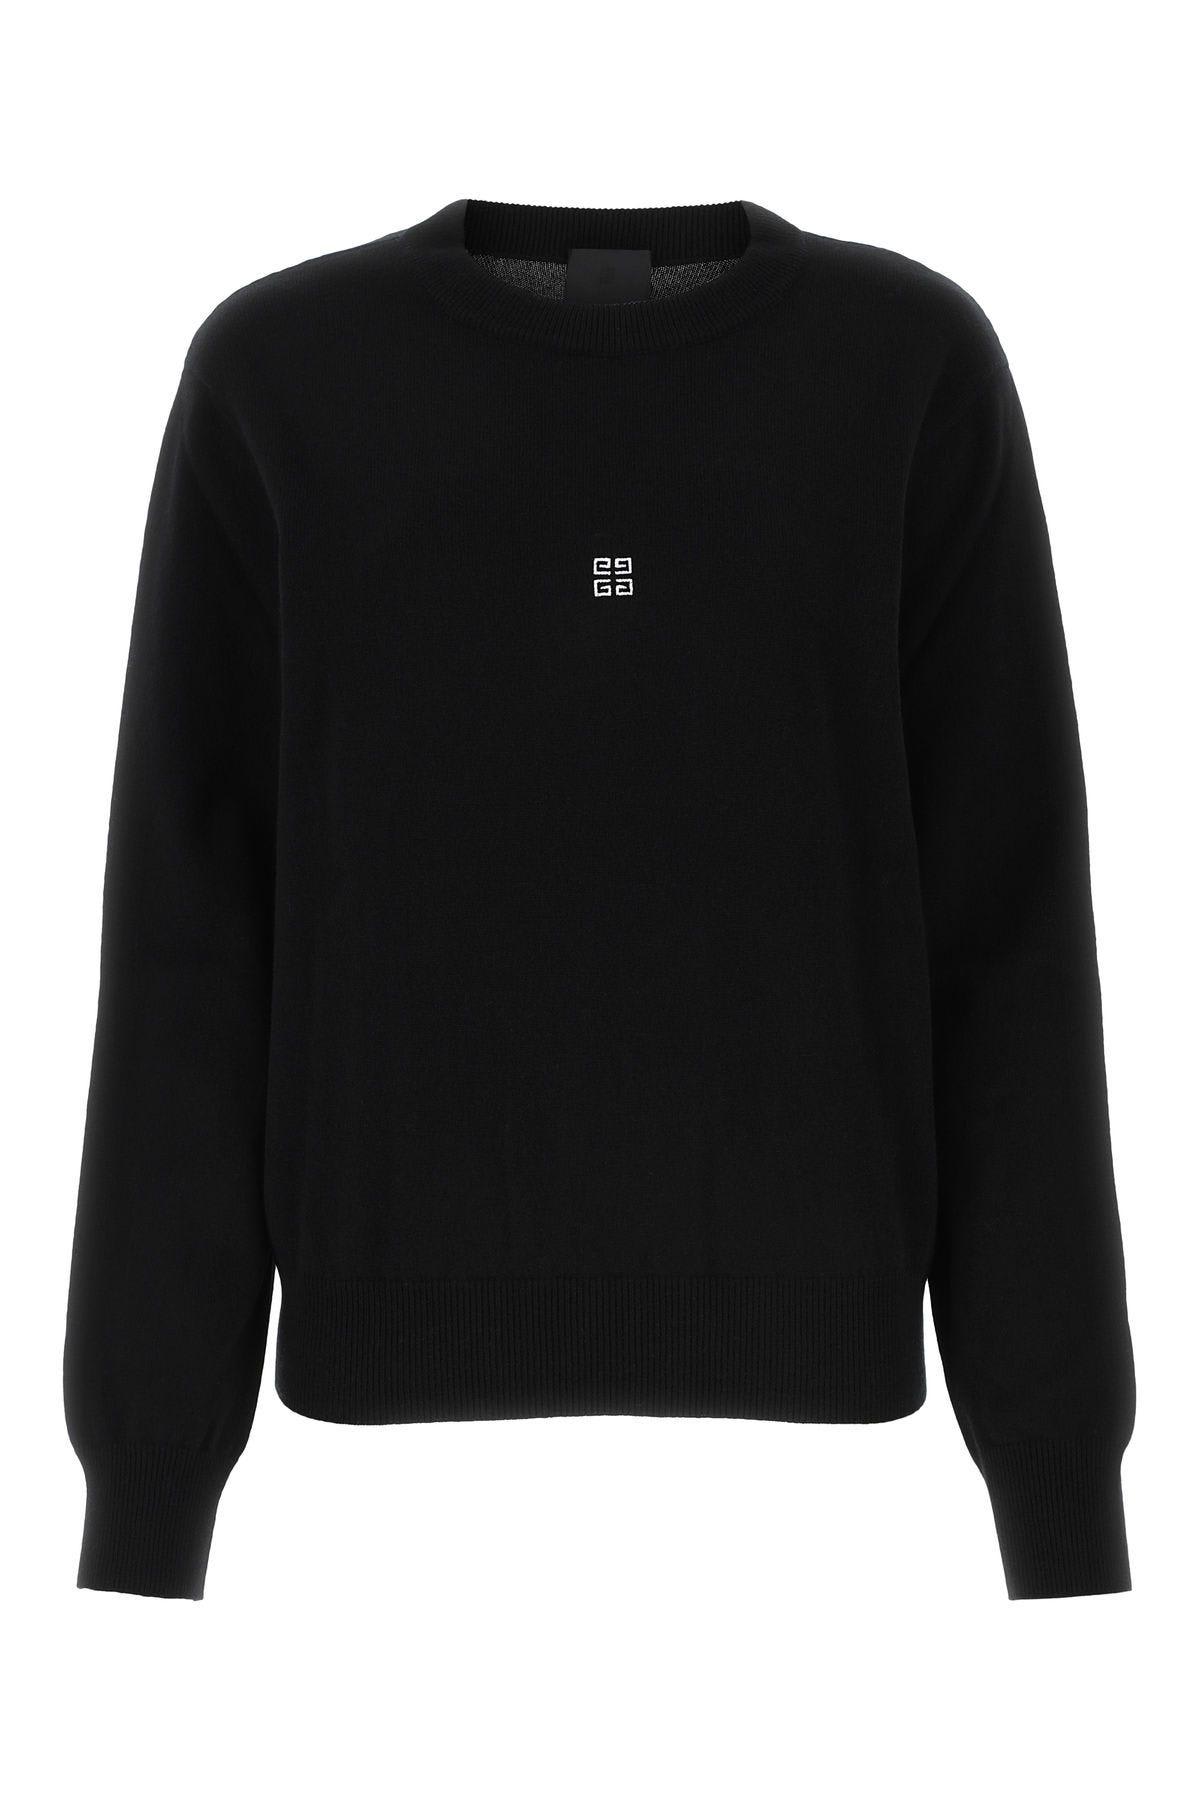 GIVENCHY BLACK WOOL BLEND SWEATER